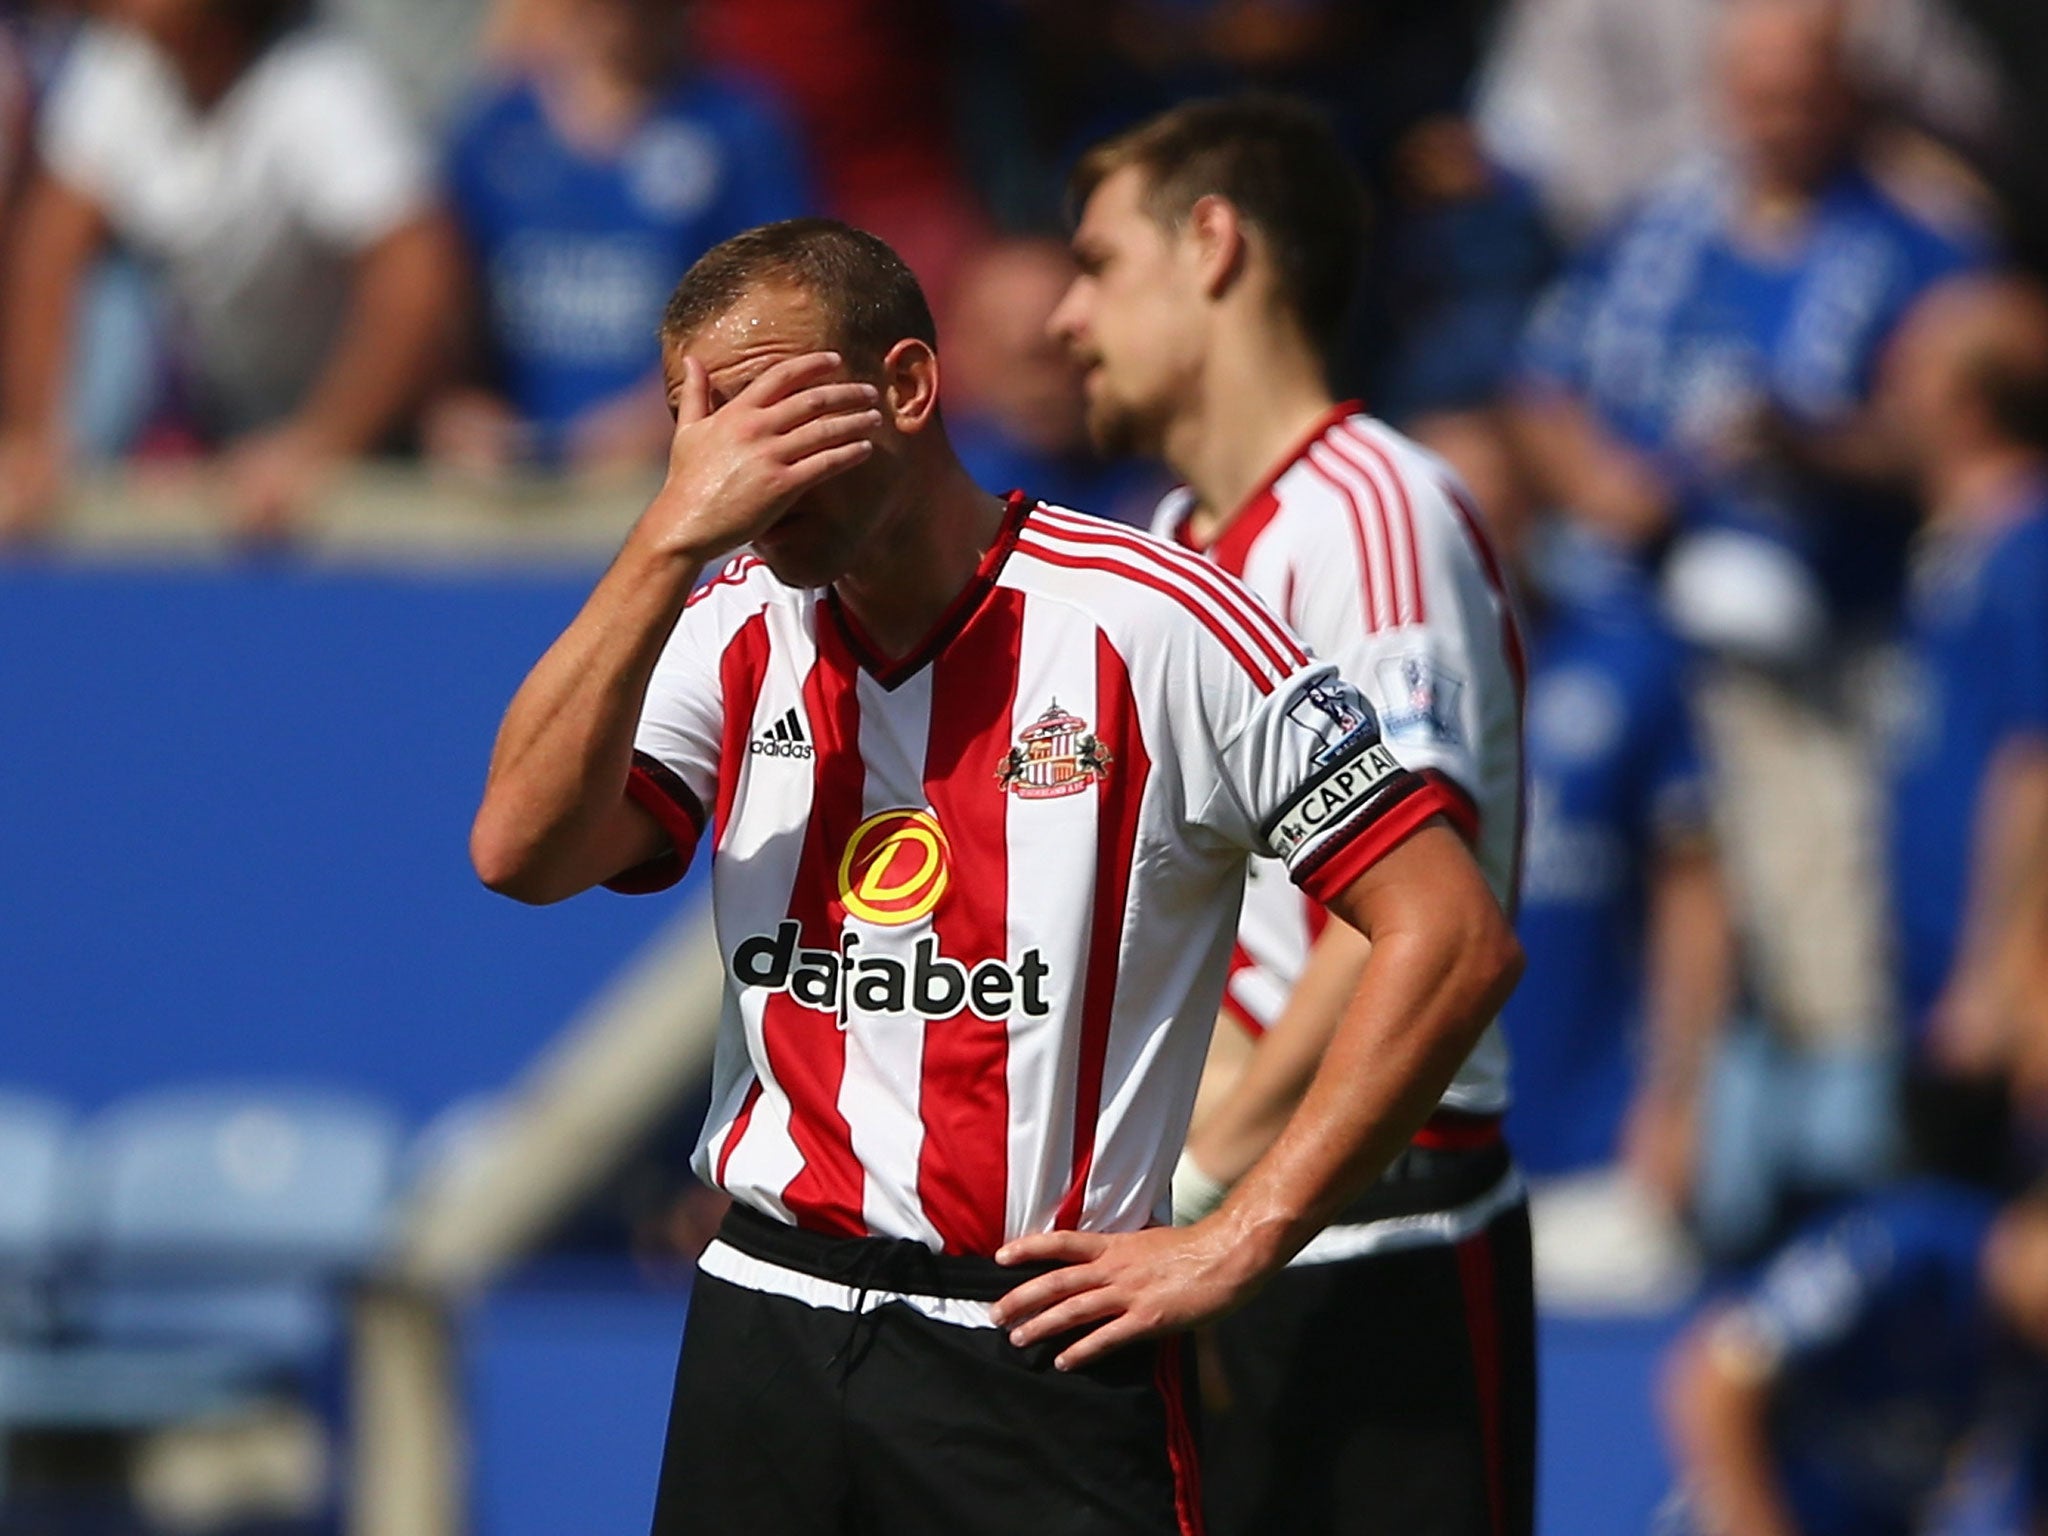 &#13;
The Sunderland captain, Lee Cattermole shows the frustration of defeat &#13;